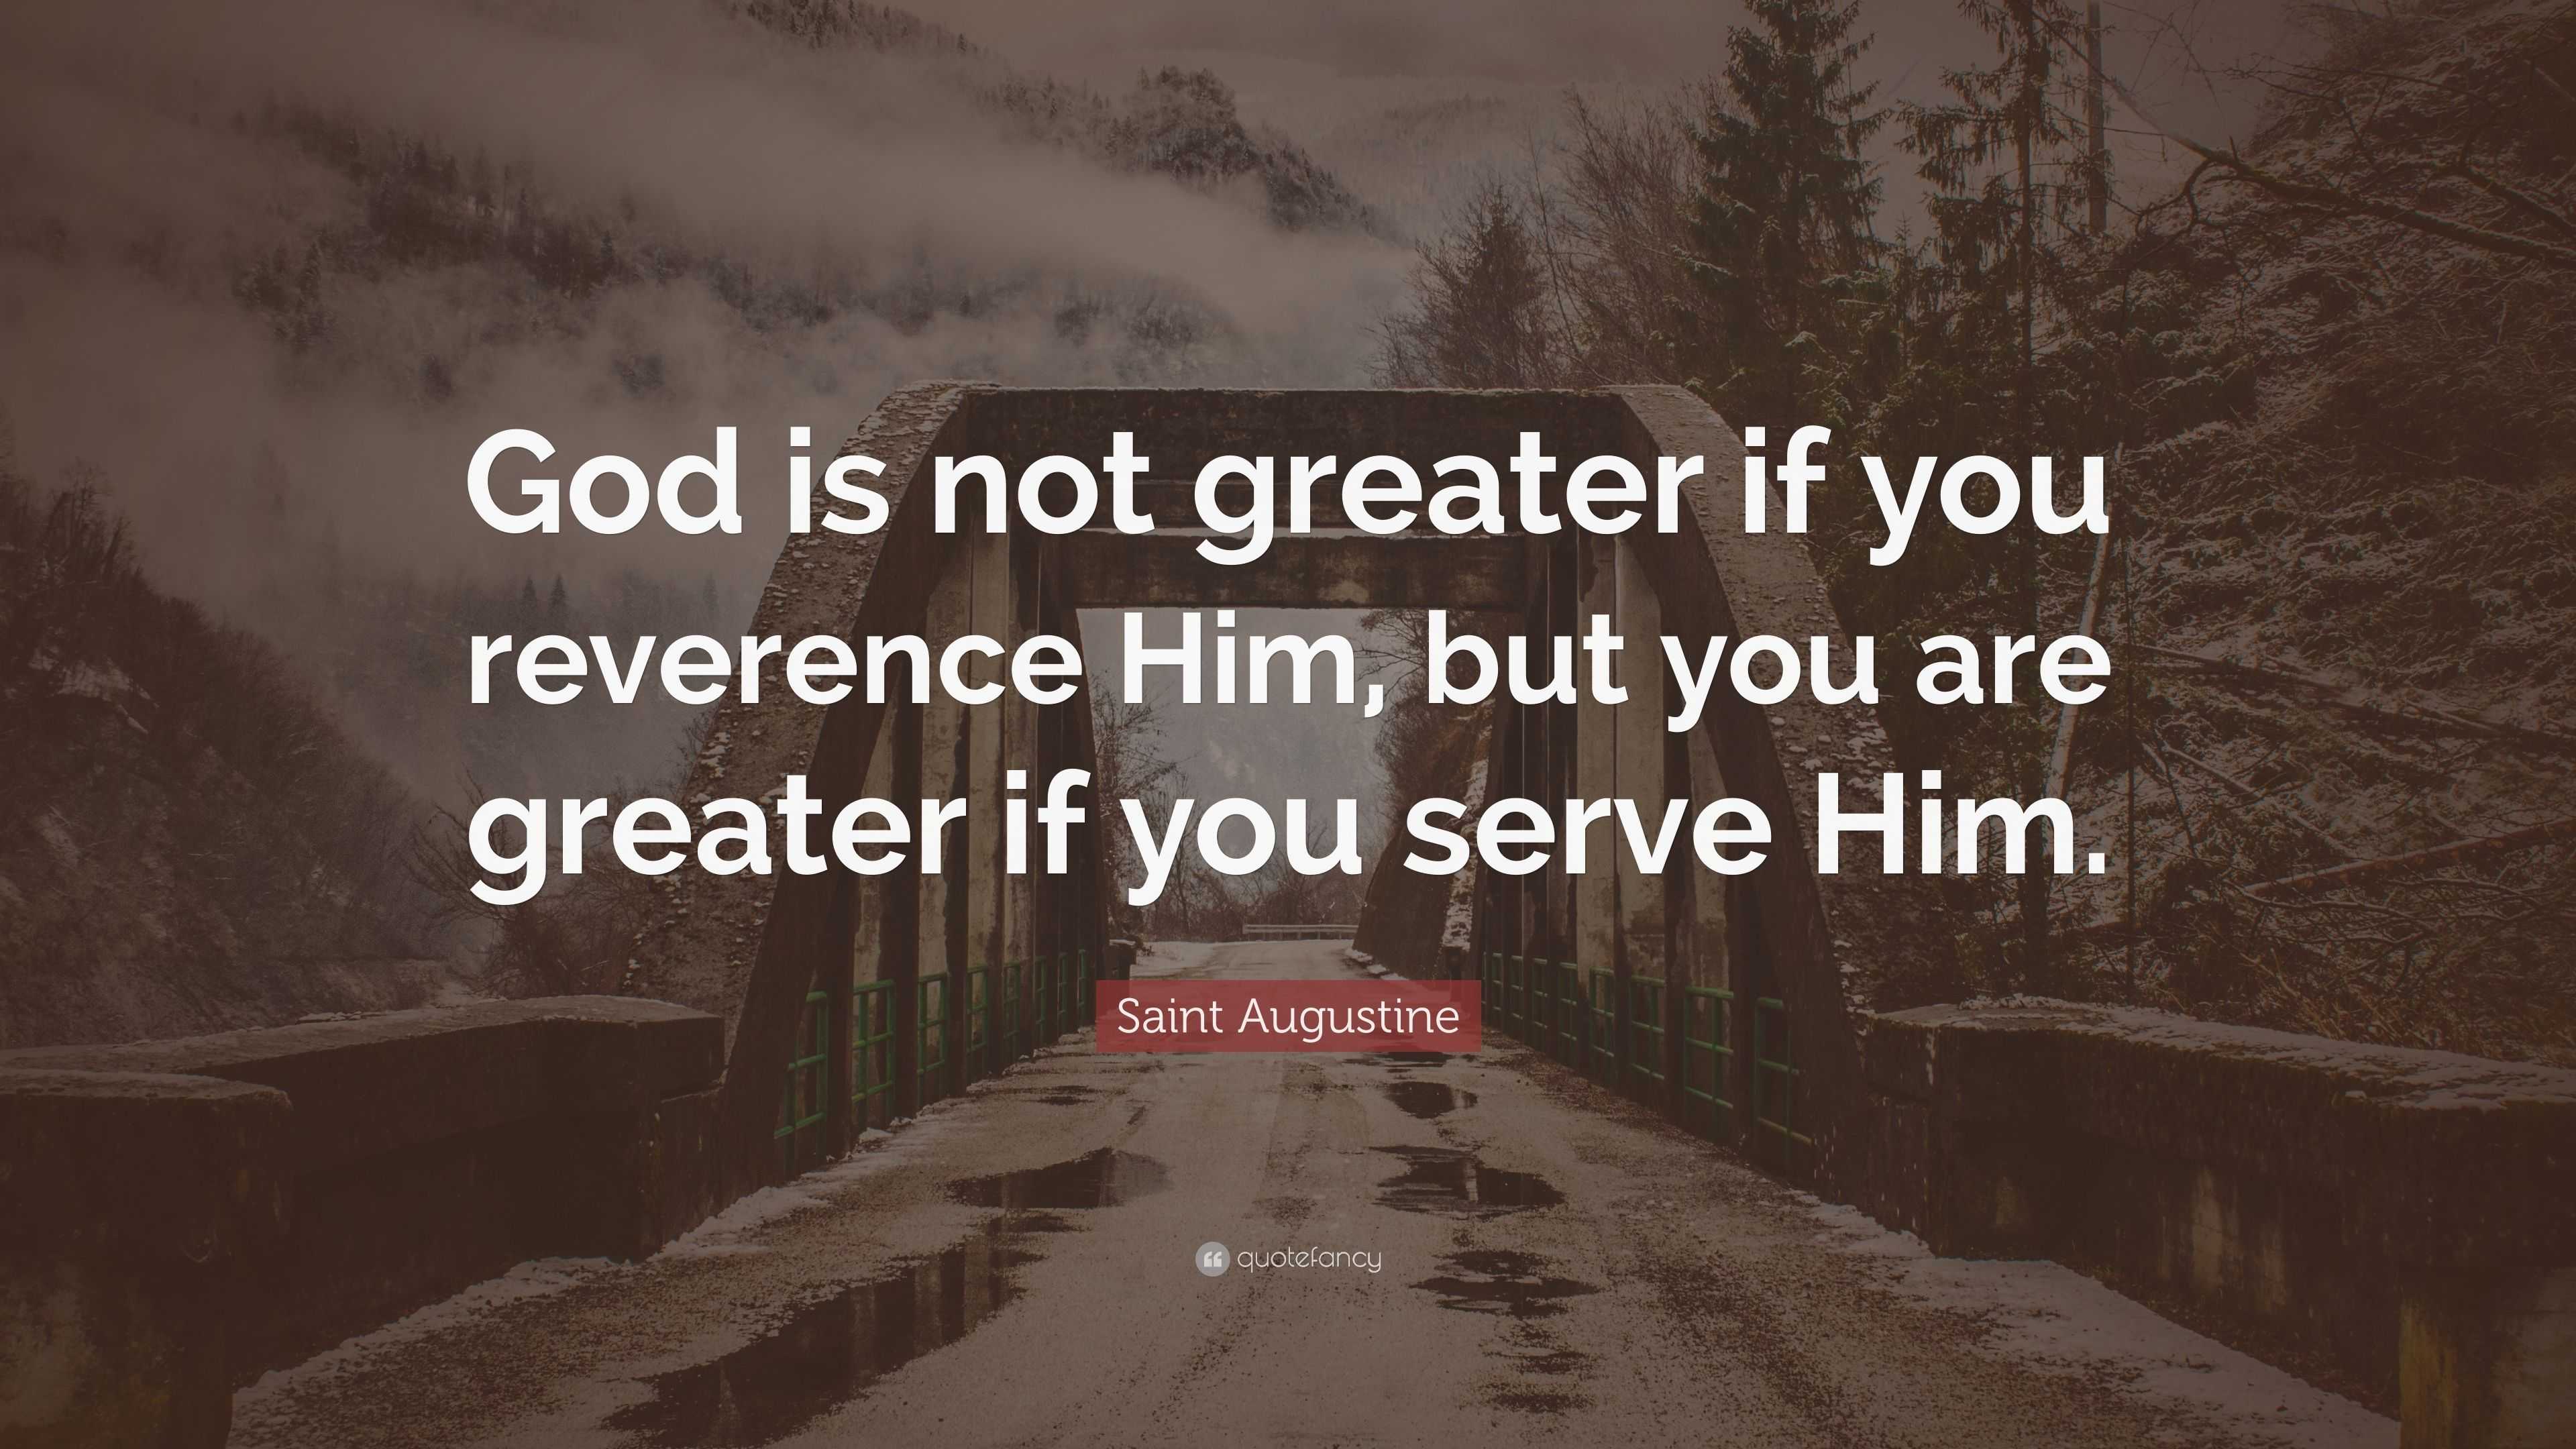 Saint Augustine Quote: “God is not greater if you reverence Him, but ...